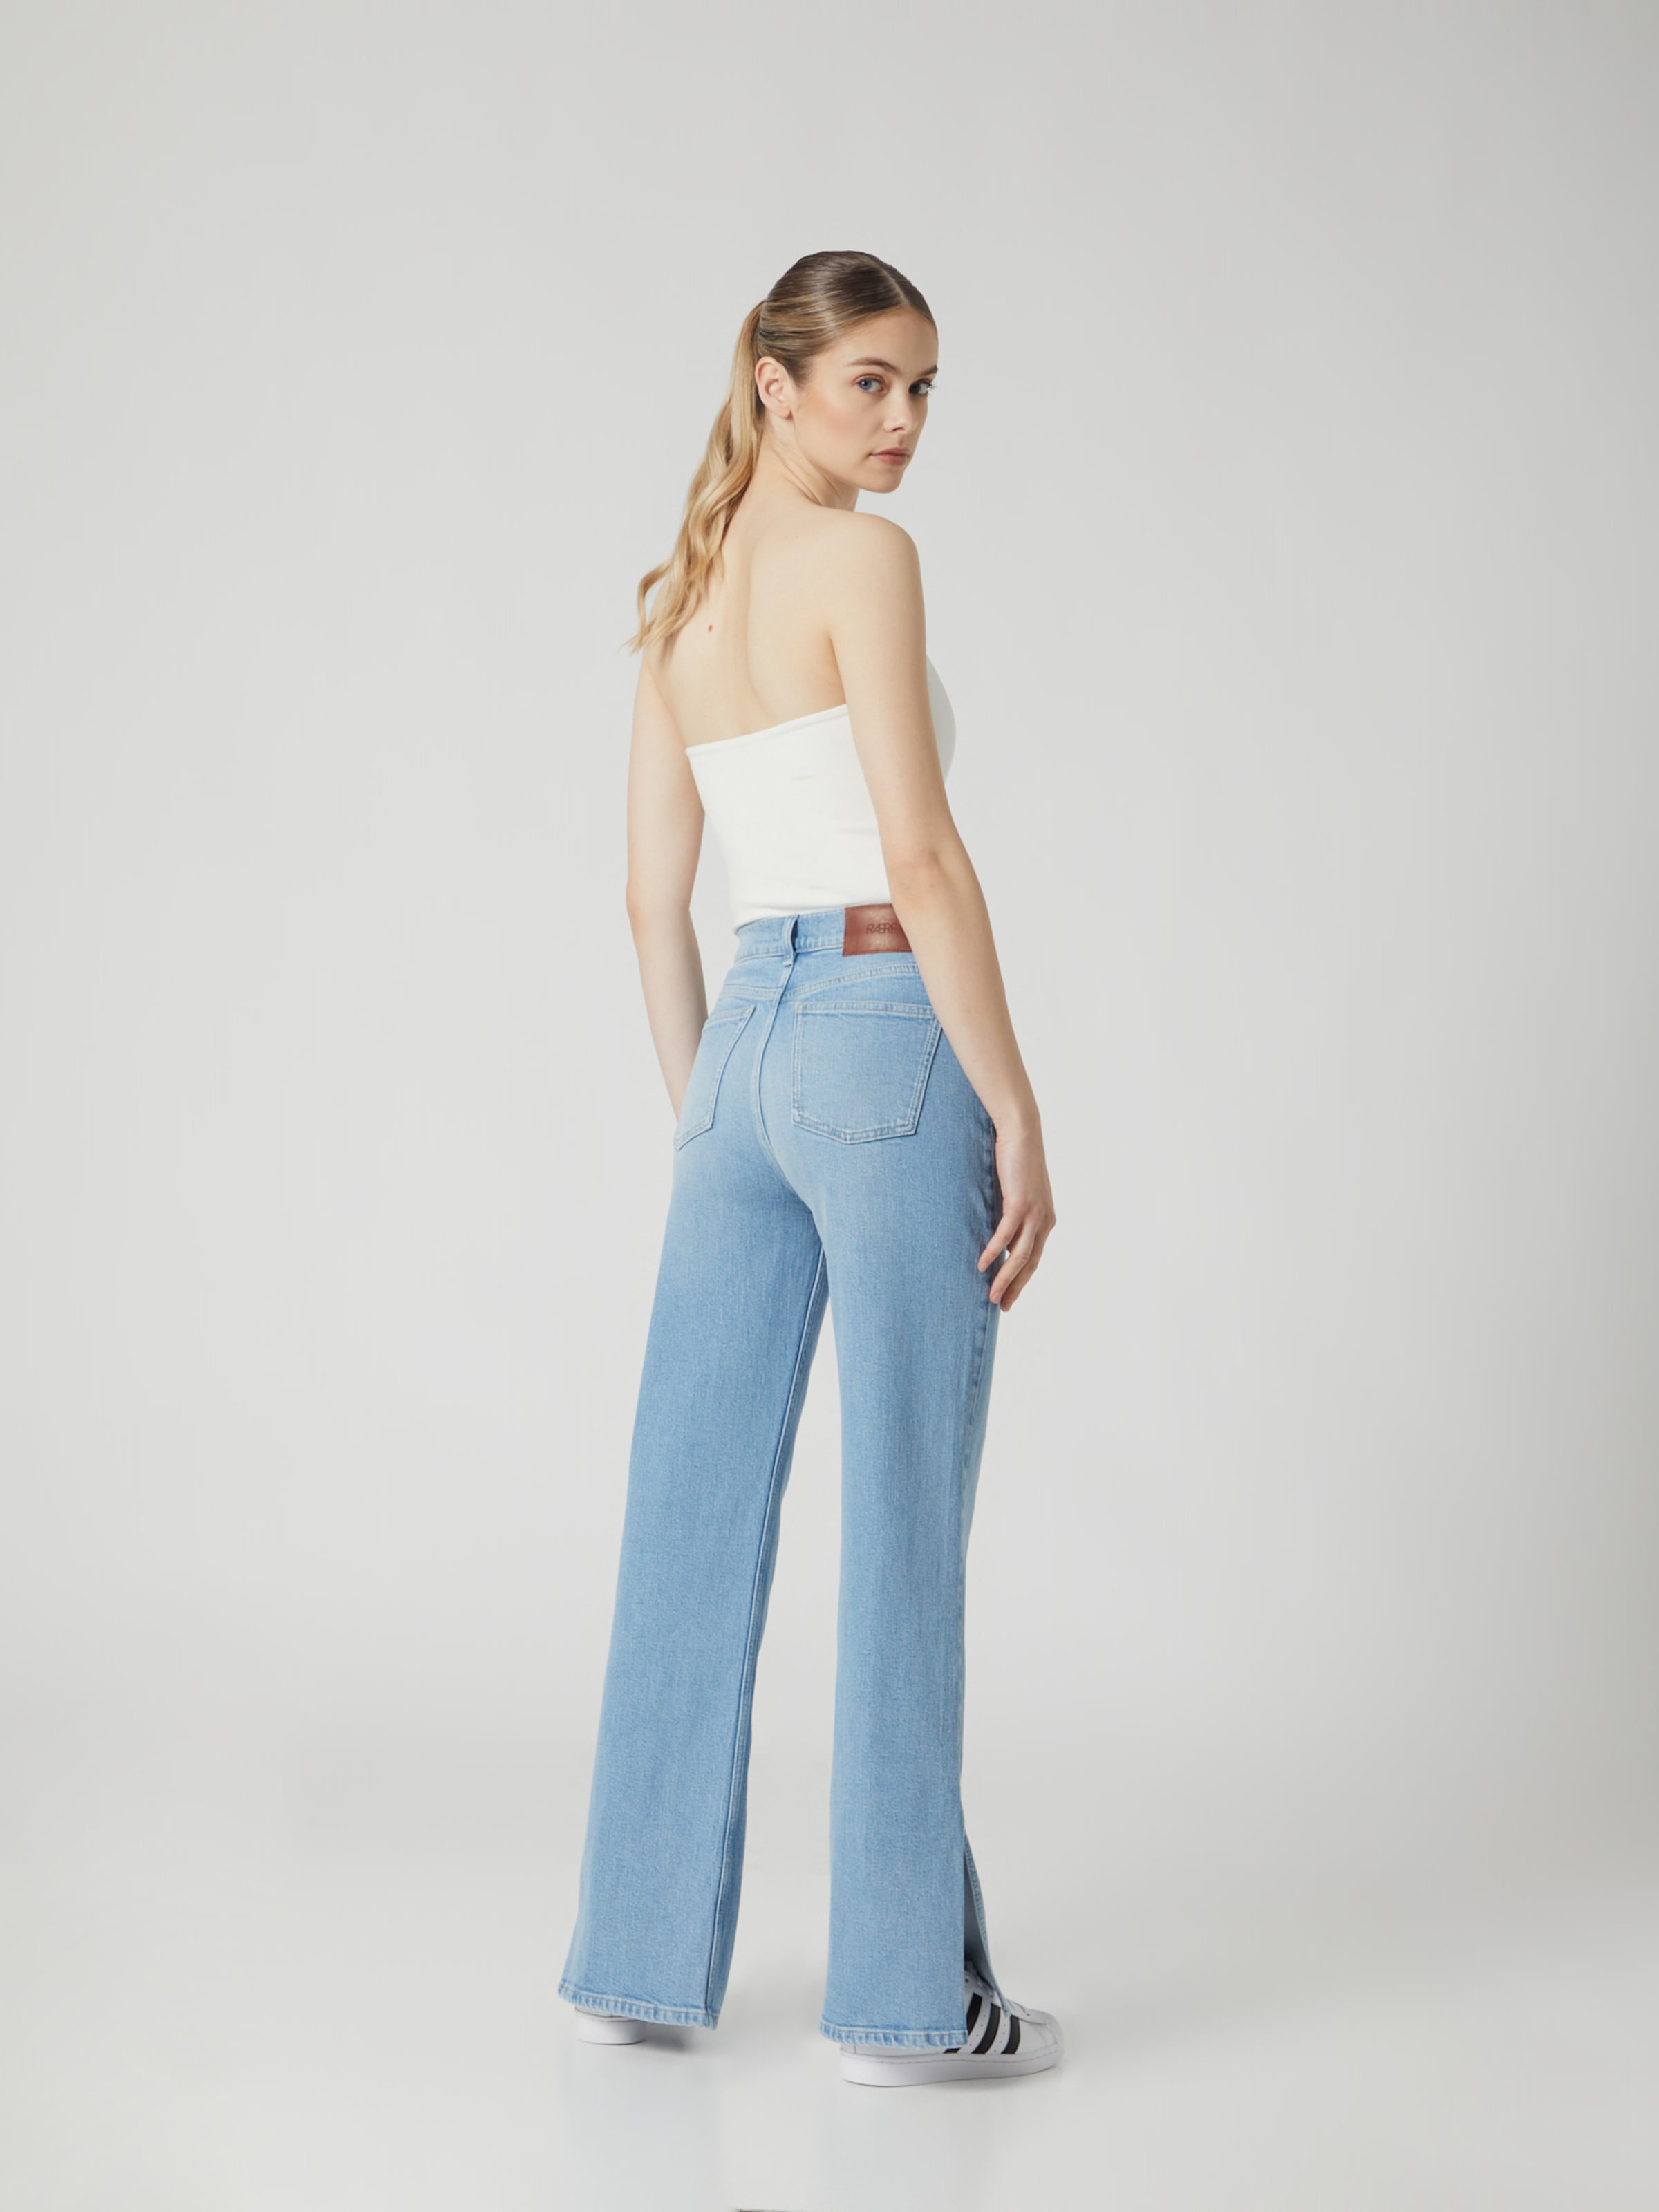 RÆRE by Lorena Rae Flared Jeans 'Tania Tall' in Grey